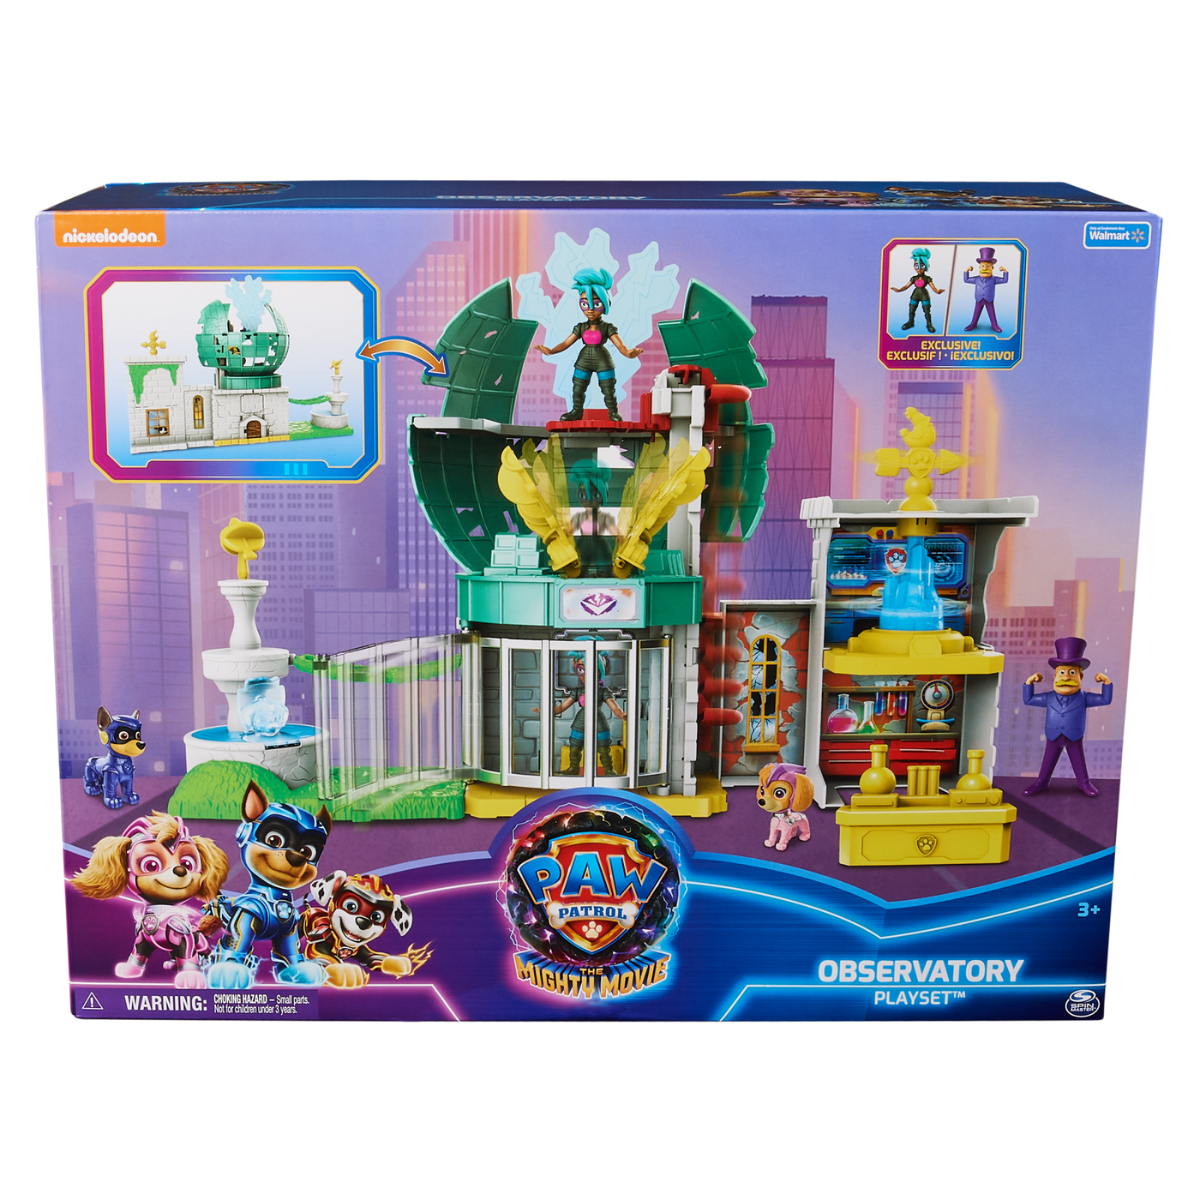 Mighty Movie Observatory Playset